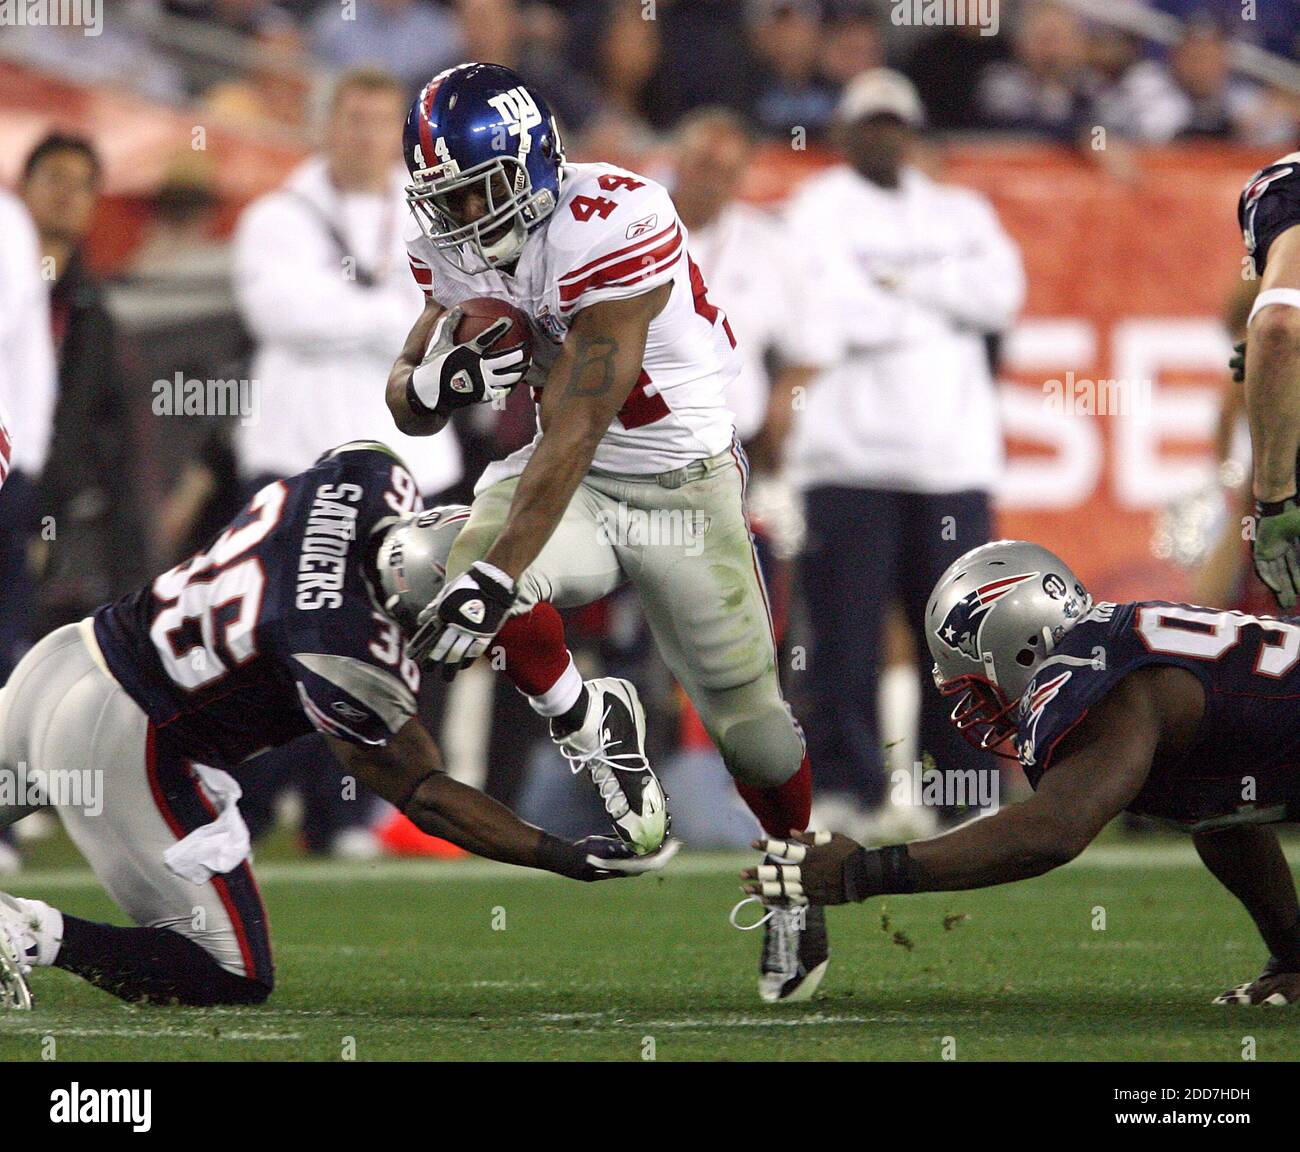 The New York Giants' Ahmad Bradshaw (44) makes an eight-yard gain against the New England Patriots in the first half of Super Bowl XLII at University of Phoenix Stadium in Glendale, AZ, USA on February 3, 2008.  The NY Giants won 17-14. Photo by Gary W. Green/MCT/Cameleon/ABACAPRESS.COM Stock Photo